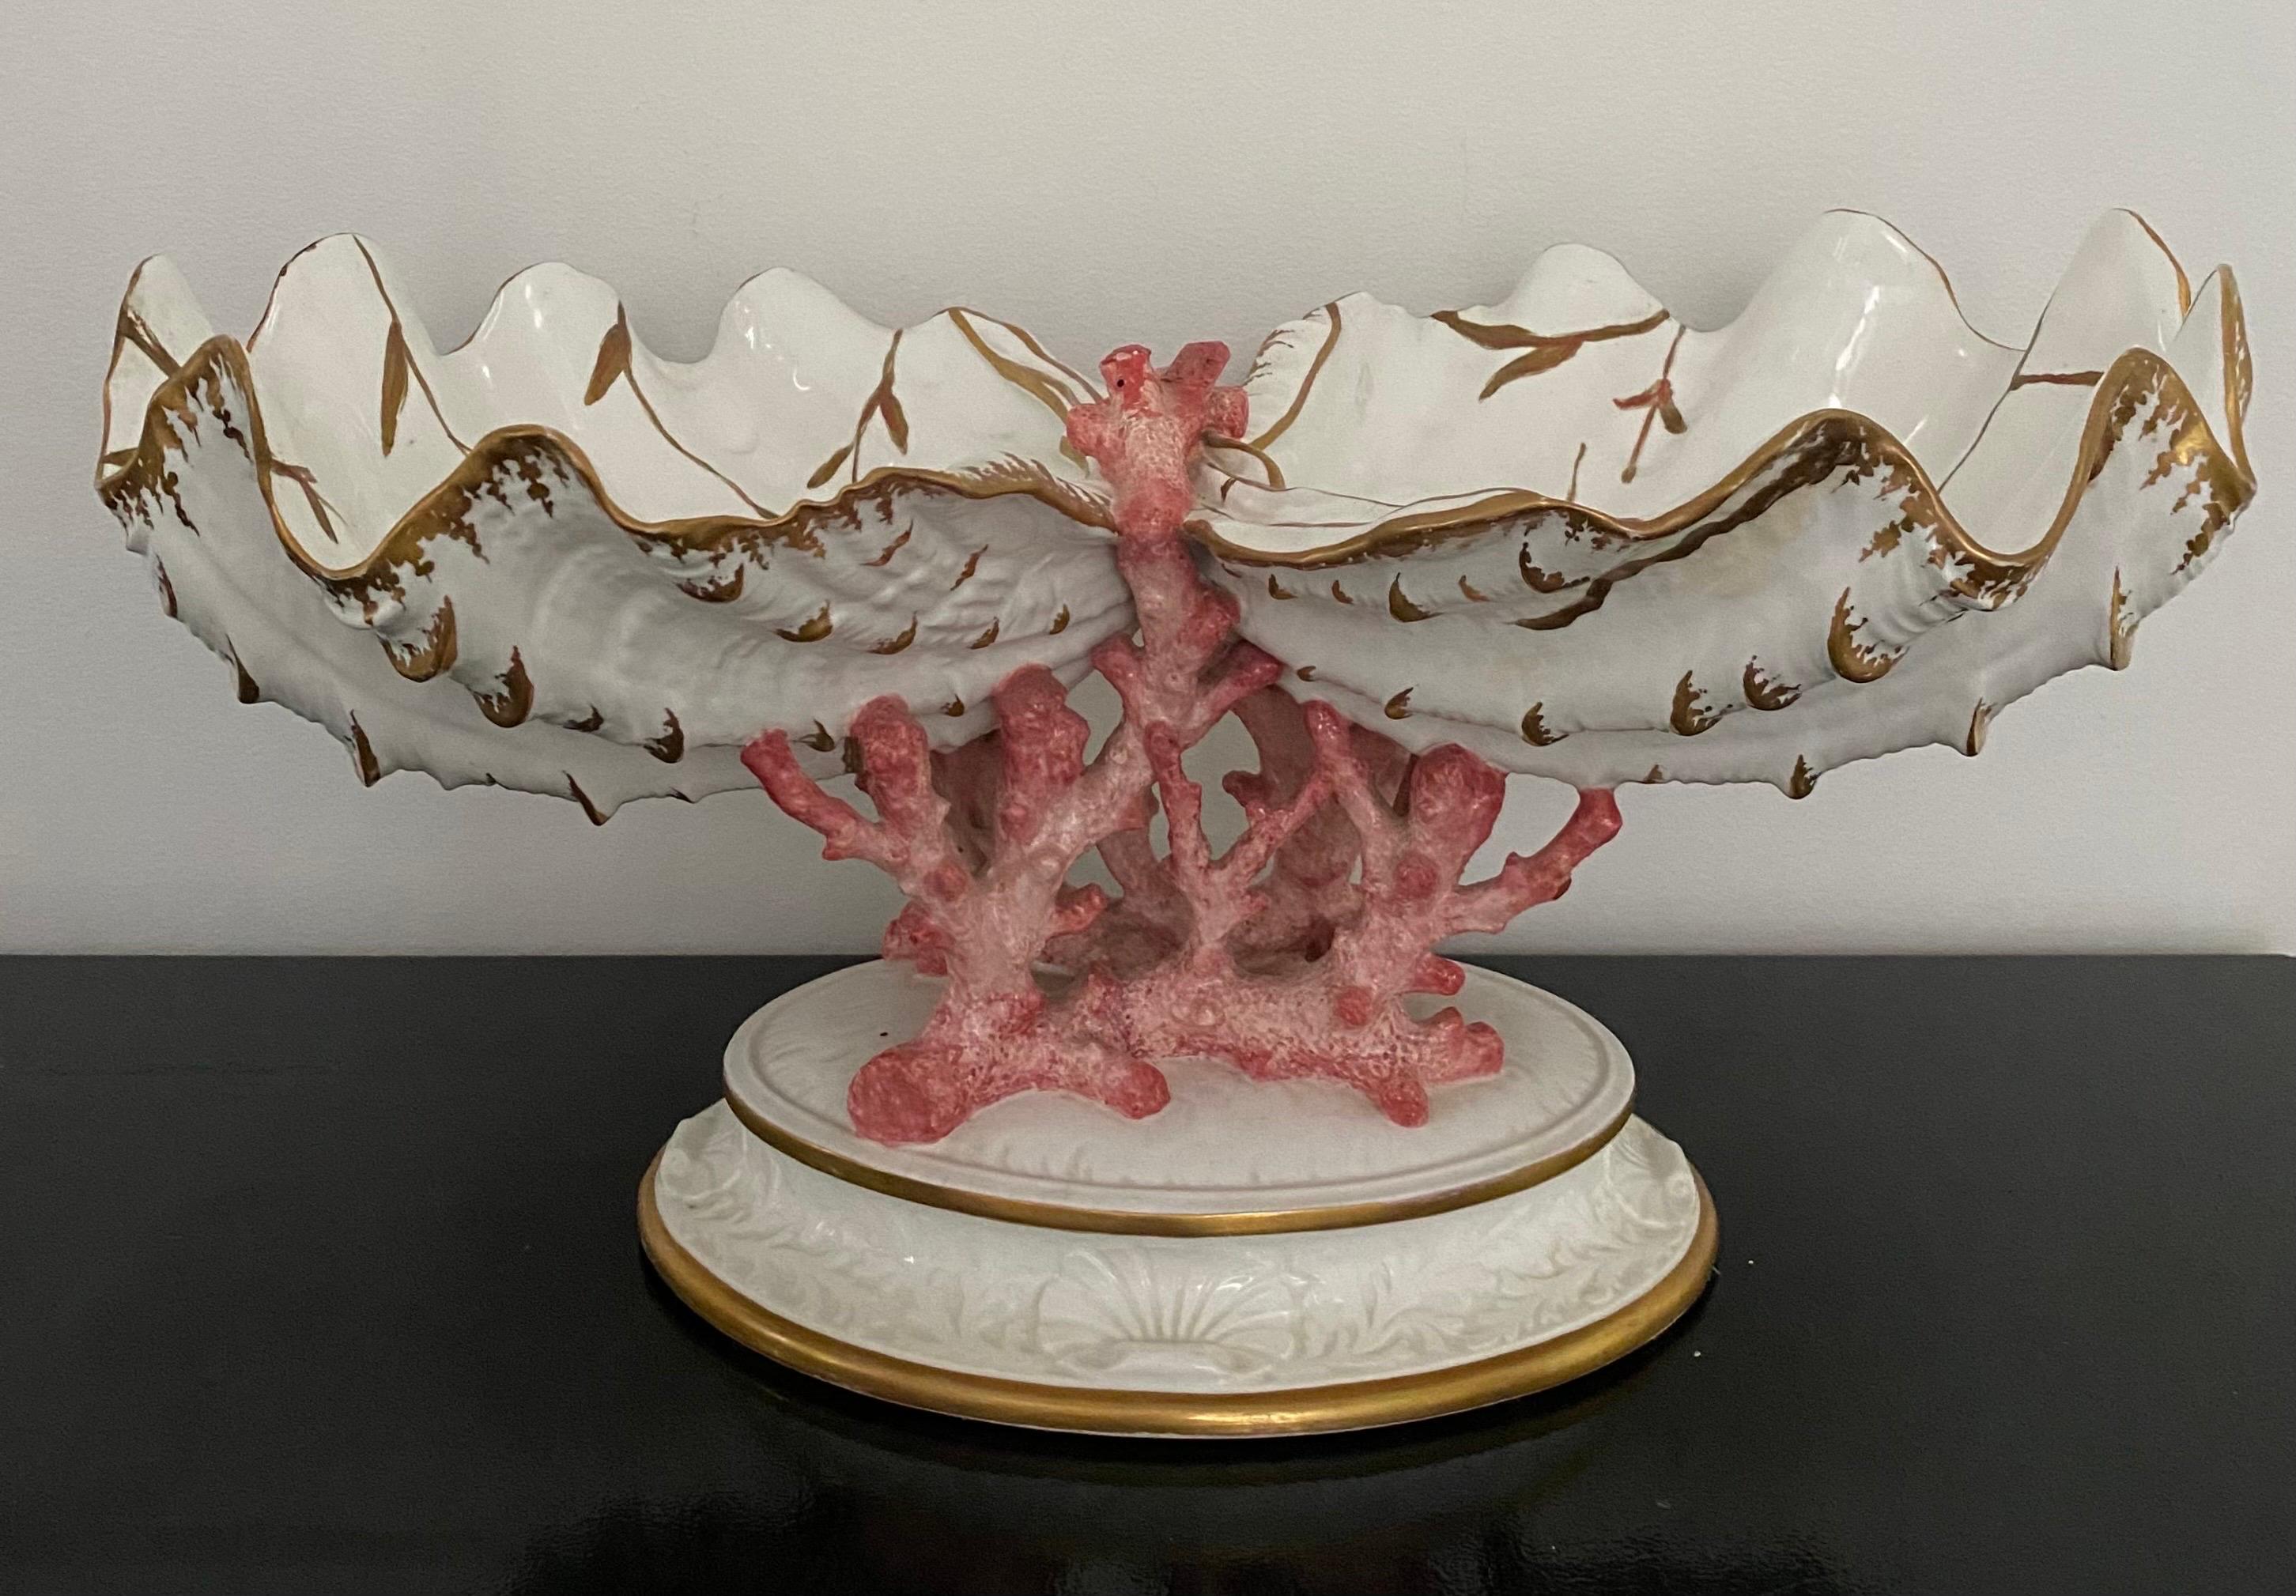 Hollywood Regency Rare Wedgwood Coral and Clamshells Decorative Pedestal Table Centerpiece Dish